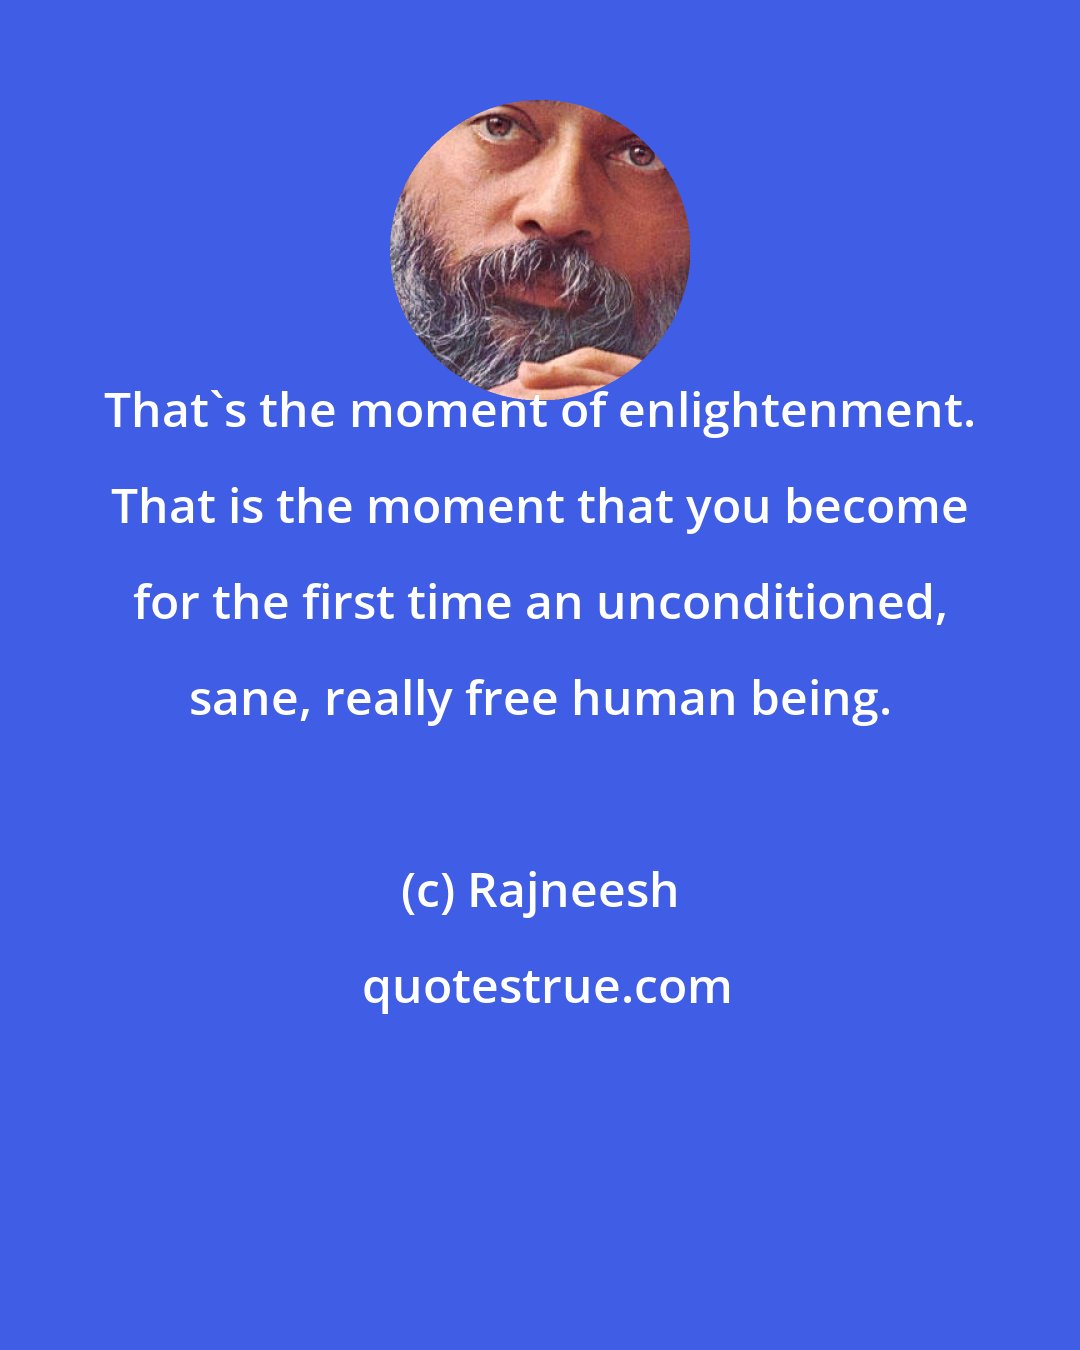 Rajneesh: That's the moment of enlightenment. That is the moment that you become for the first time an unconditioned, sane, really free human being.